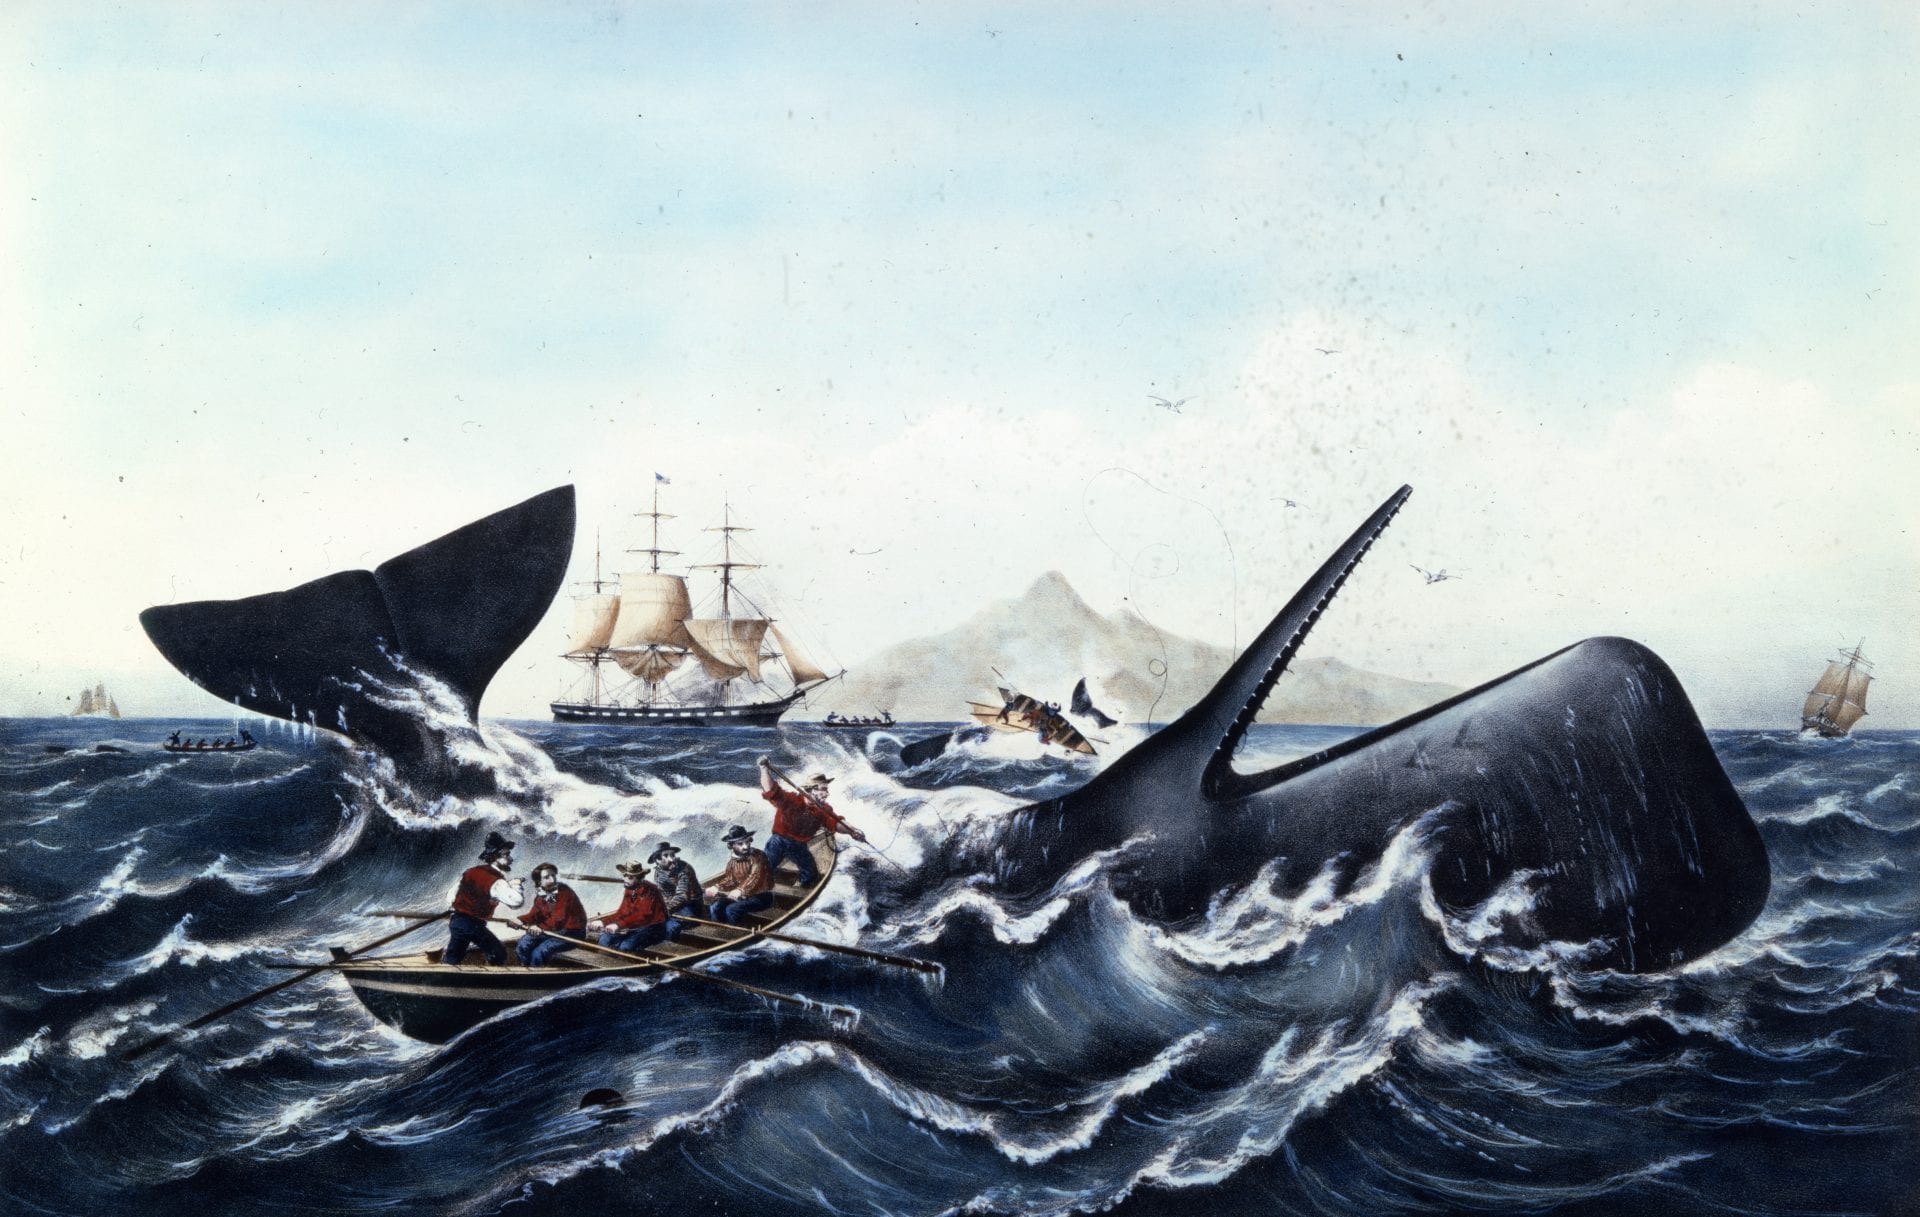 Whales and Hunting - New Bedford Whaling Museum